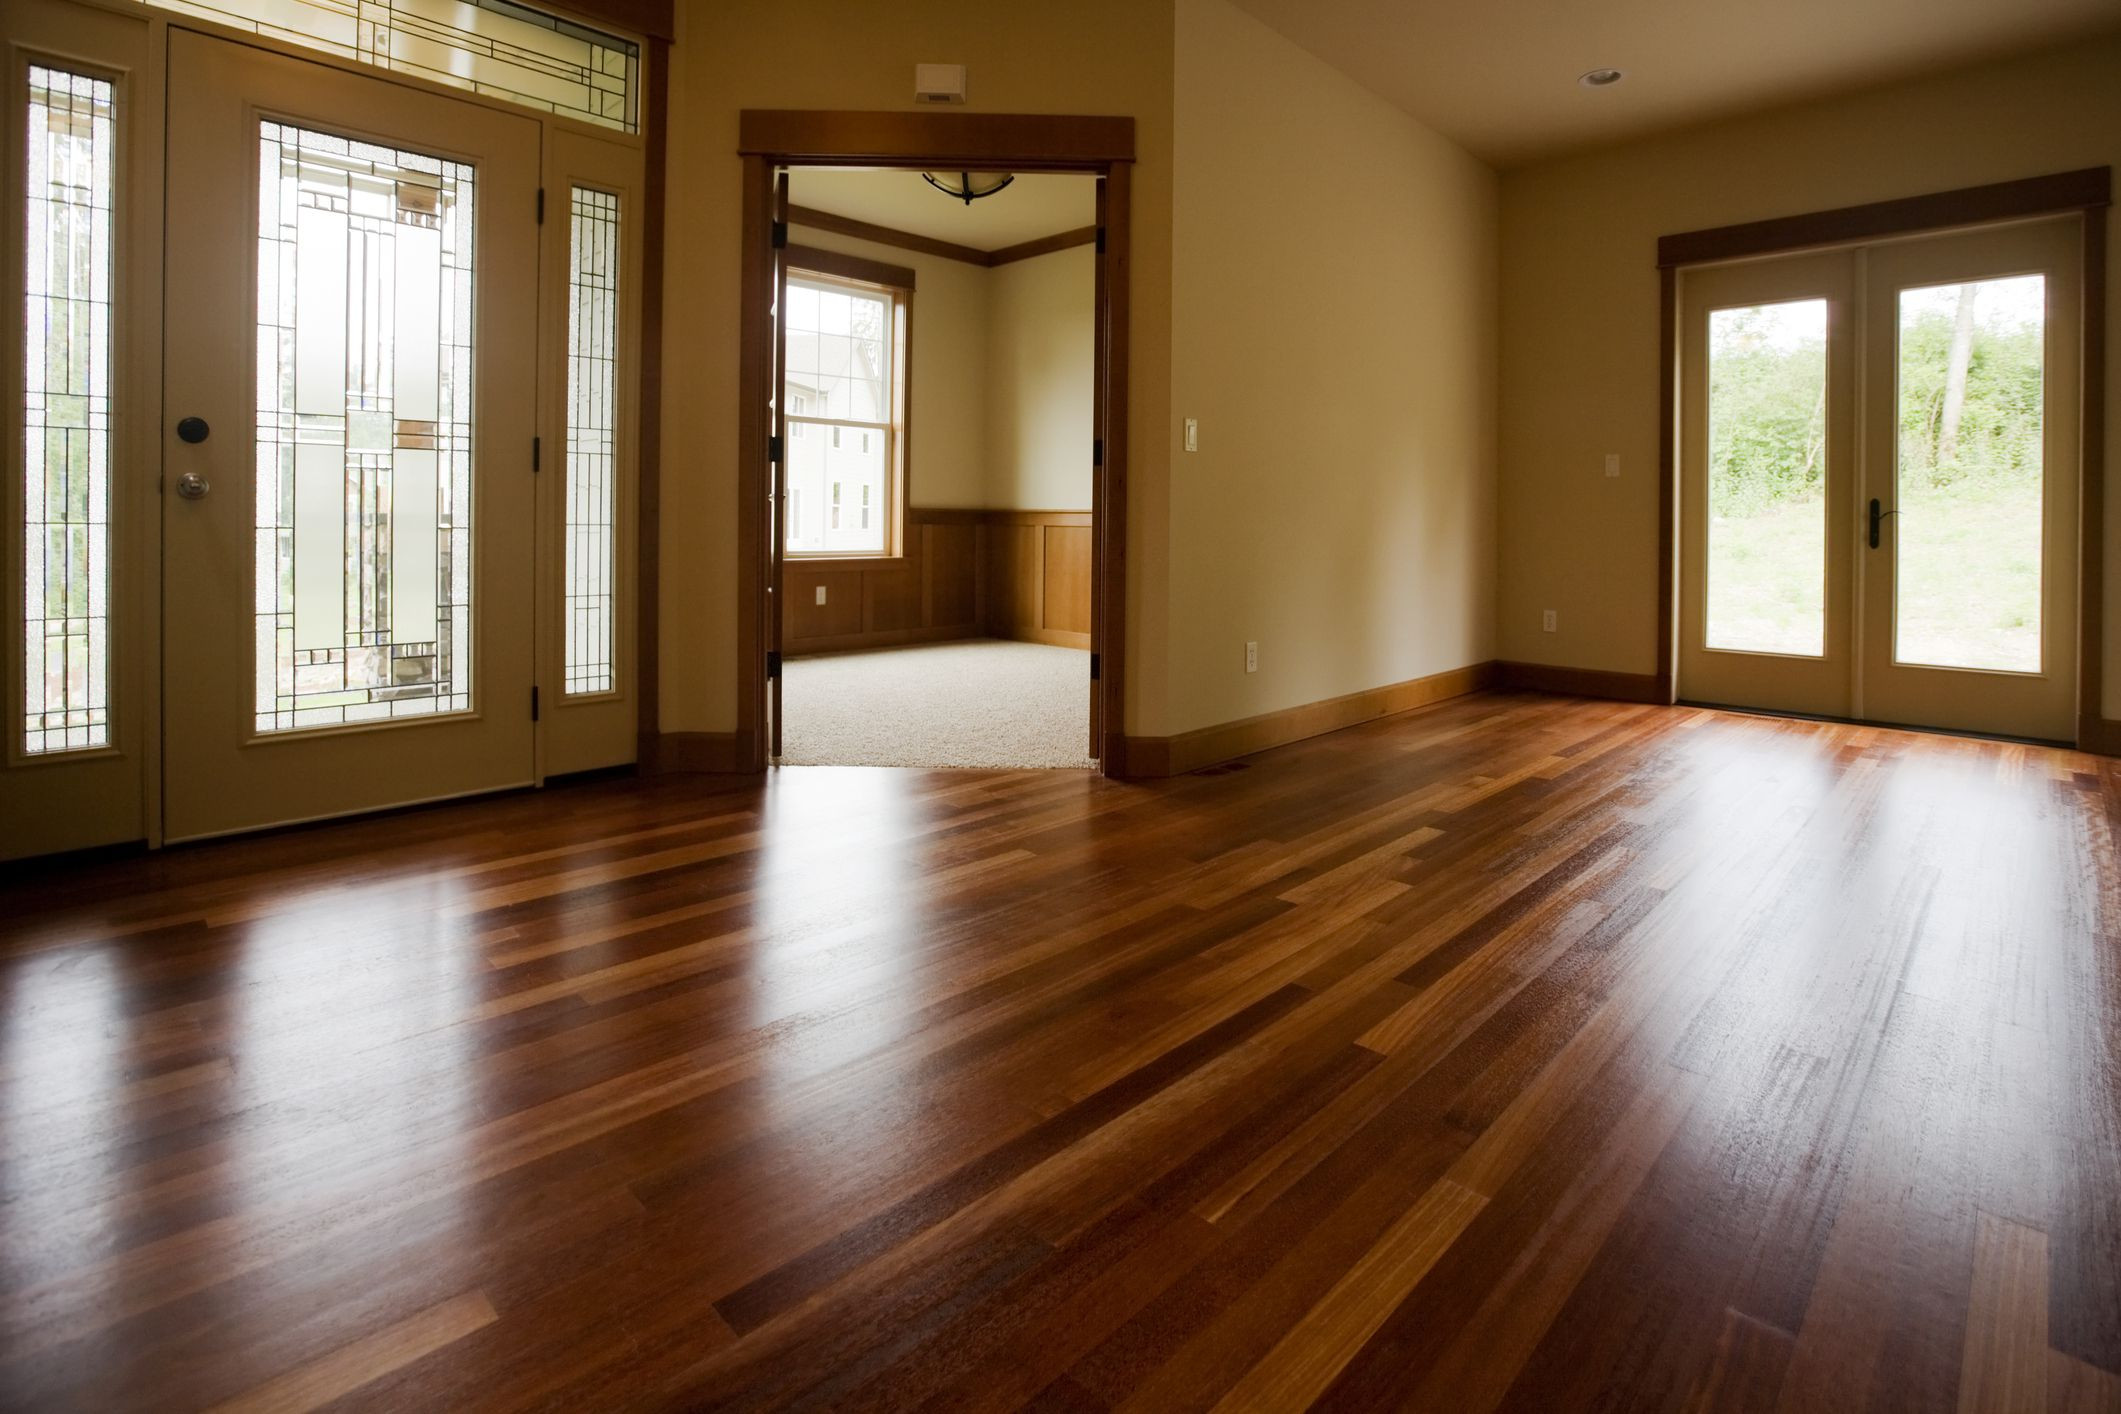 hardwood floor hardness chart of types of hardwood flooring buyers guide pertaining to gettyimages 157332889 5886d8383df78c2ccd65d4e1